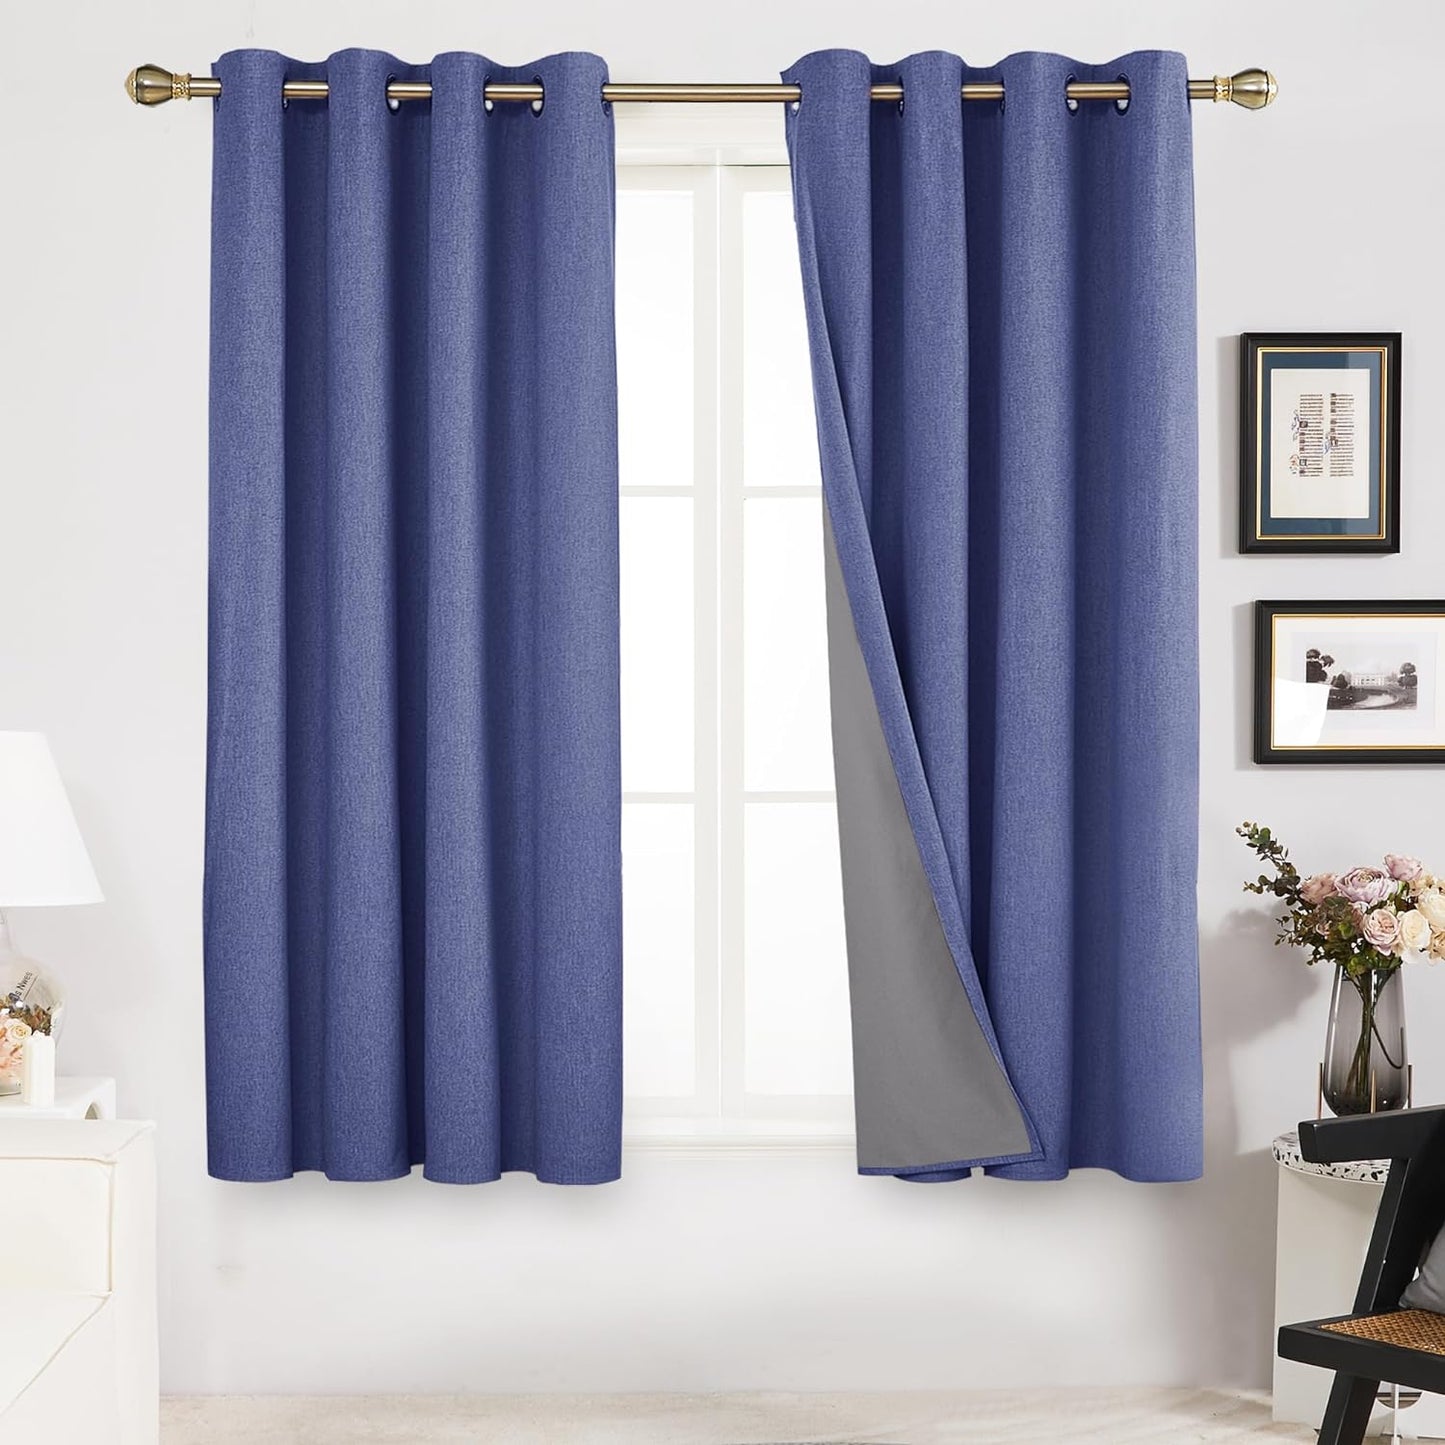 Deconovo Linen Blackout Curtains 84 Inch Length Set of 2, Thermal Curtain Drapes with Grey Coating, Total Light Blocking Waterproof Curtains for Indoor/Outdoor (Light Grey, 52W X 84L Inch)  Deconovo Blue 52X45 Inches 